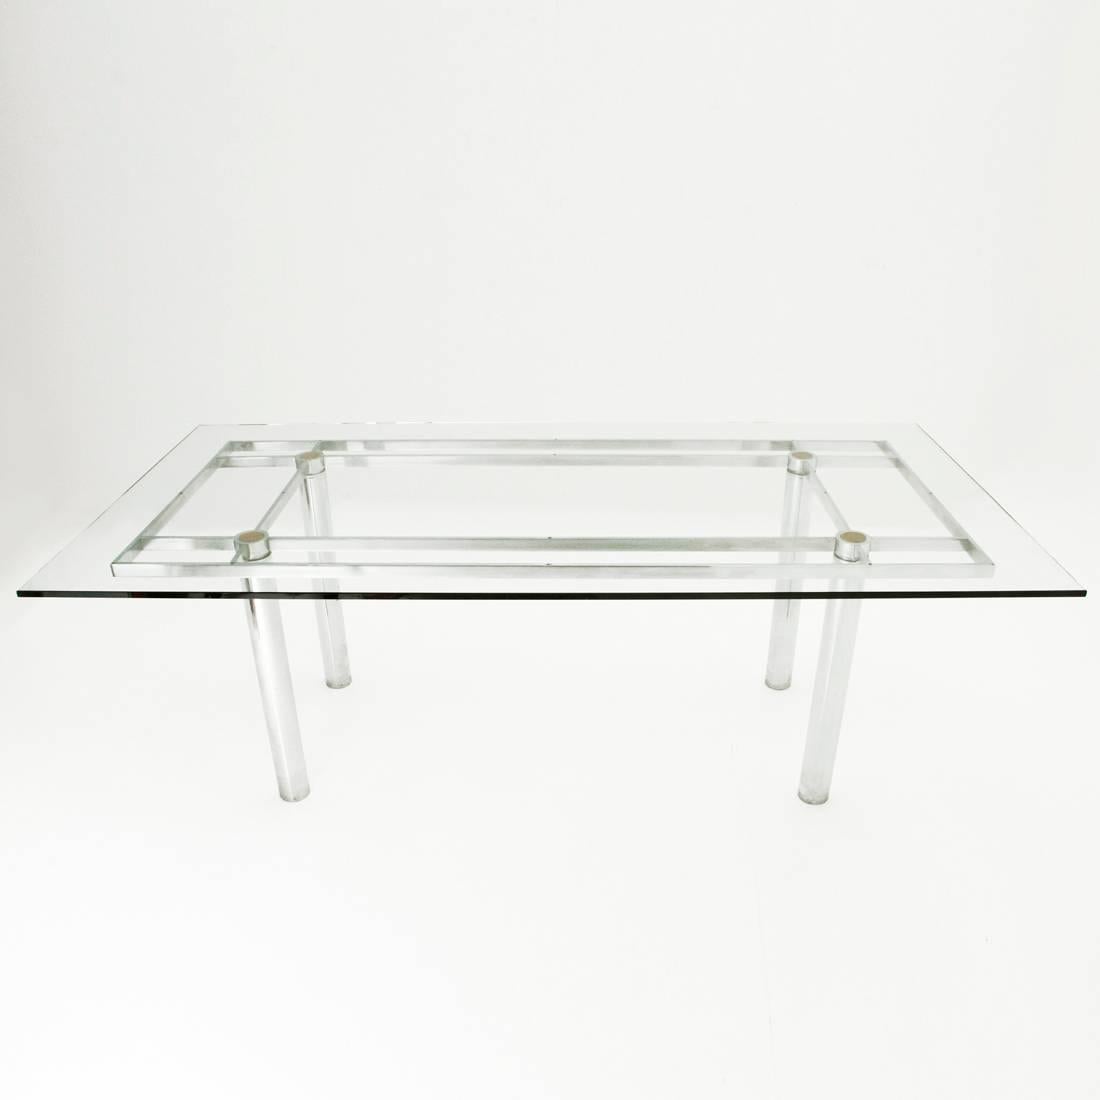 Large rectangular table designed by Tobia Shoe for Gavina in the 1960s.
Solid metal frame in chromed metal, thick glass top,
feet and rests top, in leather.
Good general conditions, some signs due to normal use over time.

Dimensions: Width 202